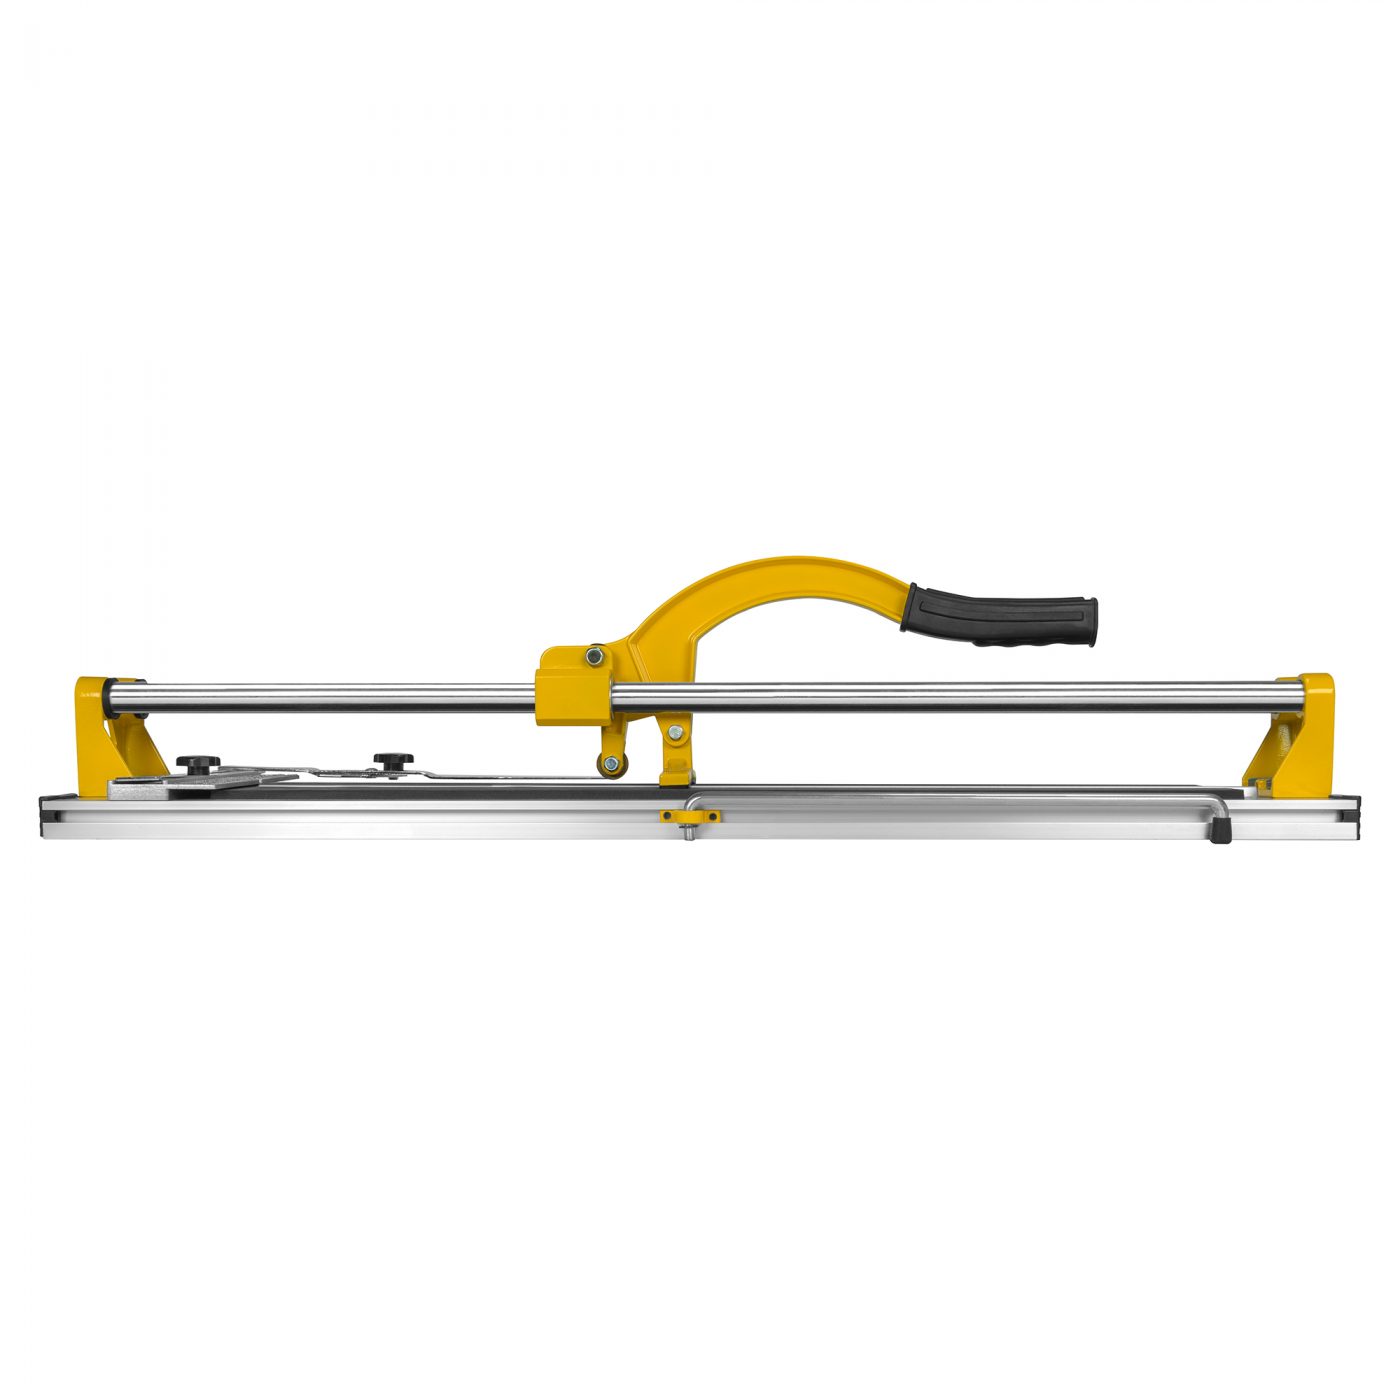 24" Professional Tile Cutter